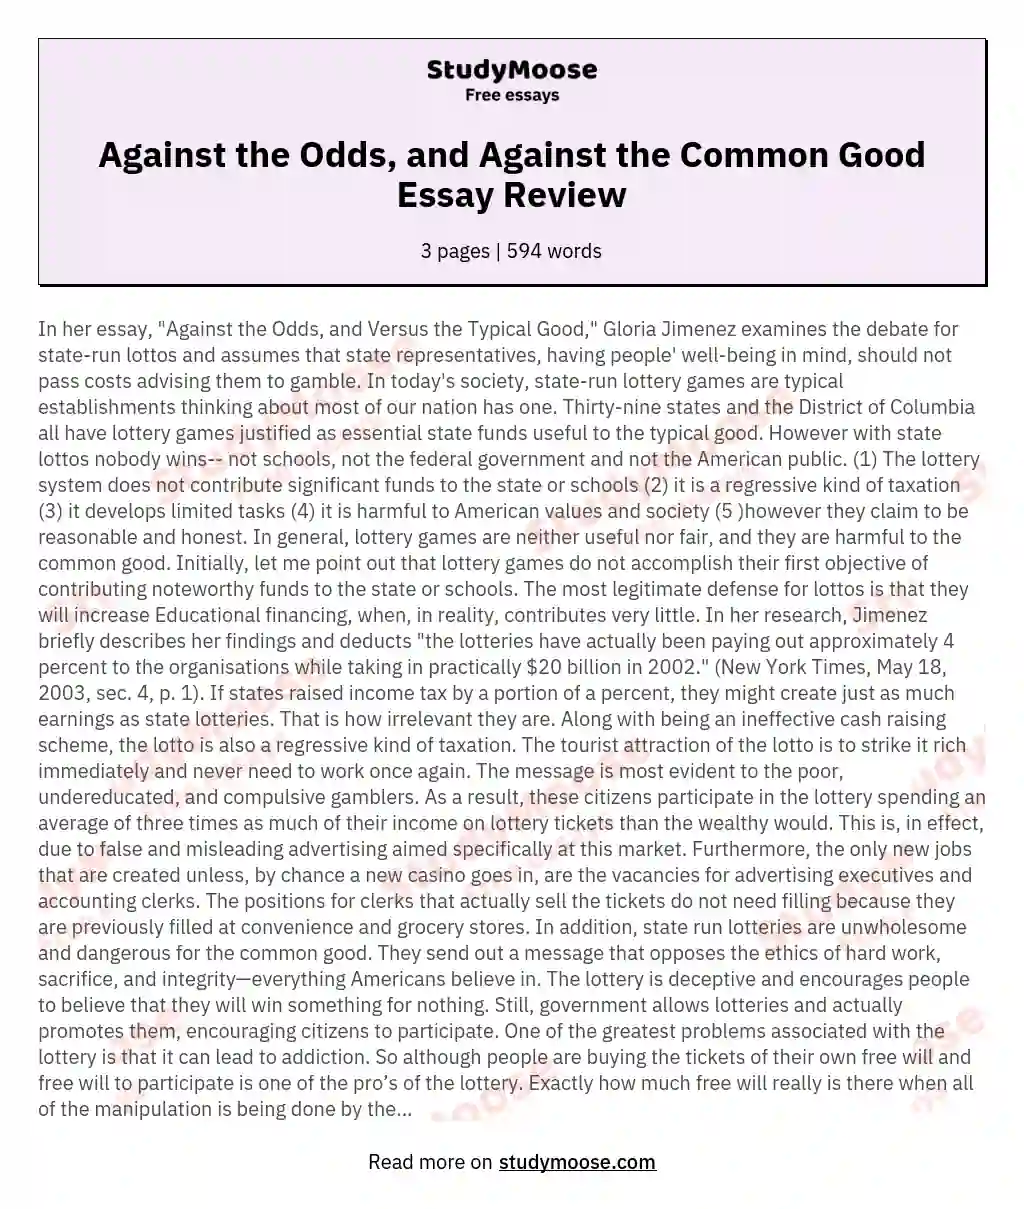 Against the Odds, and Against the Common Good Essay Review